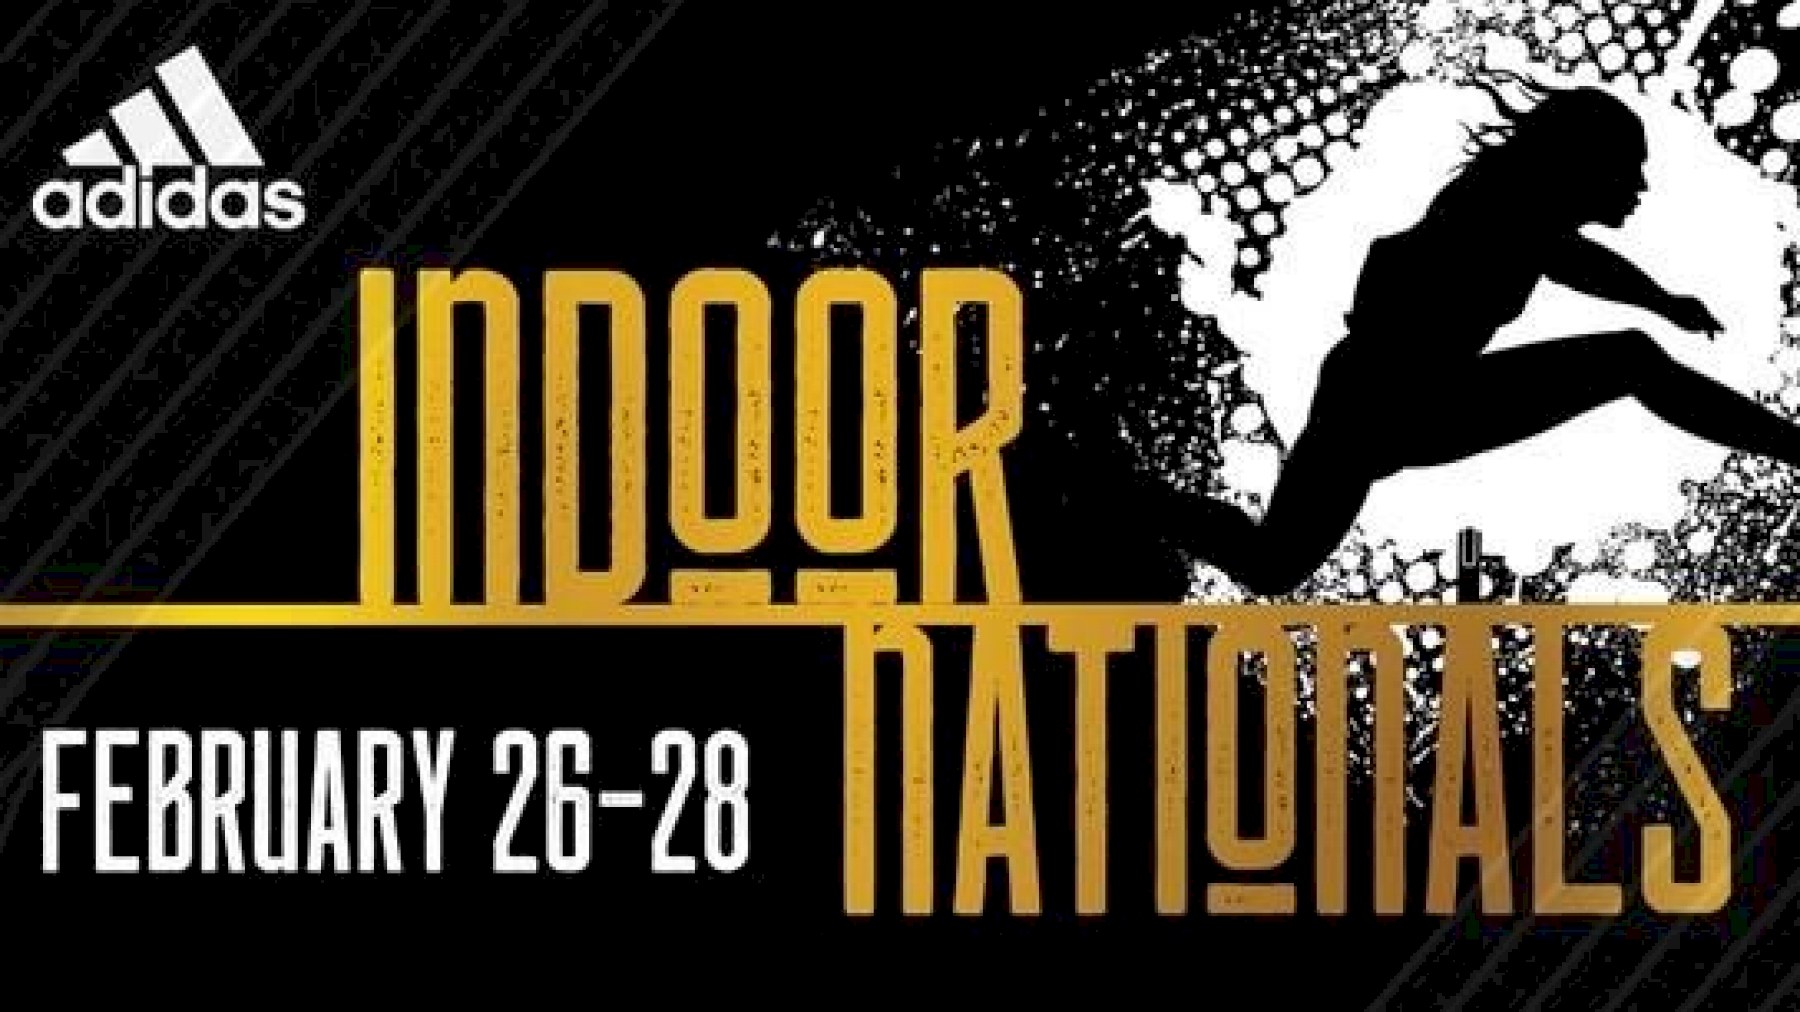 See the results for the 2021 adidas Indoor Nationals track and field